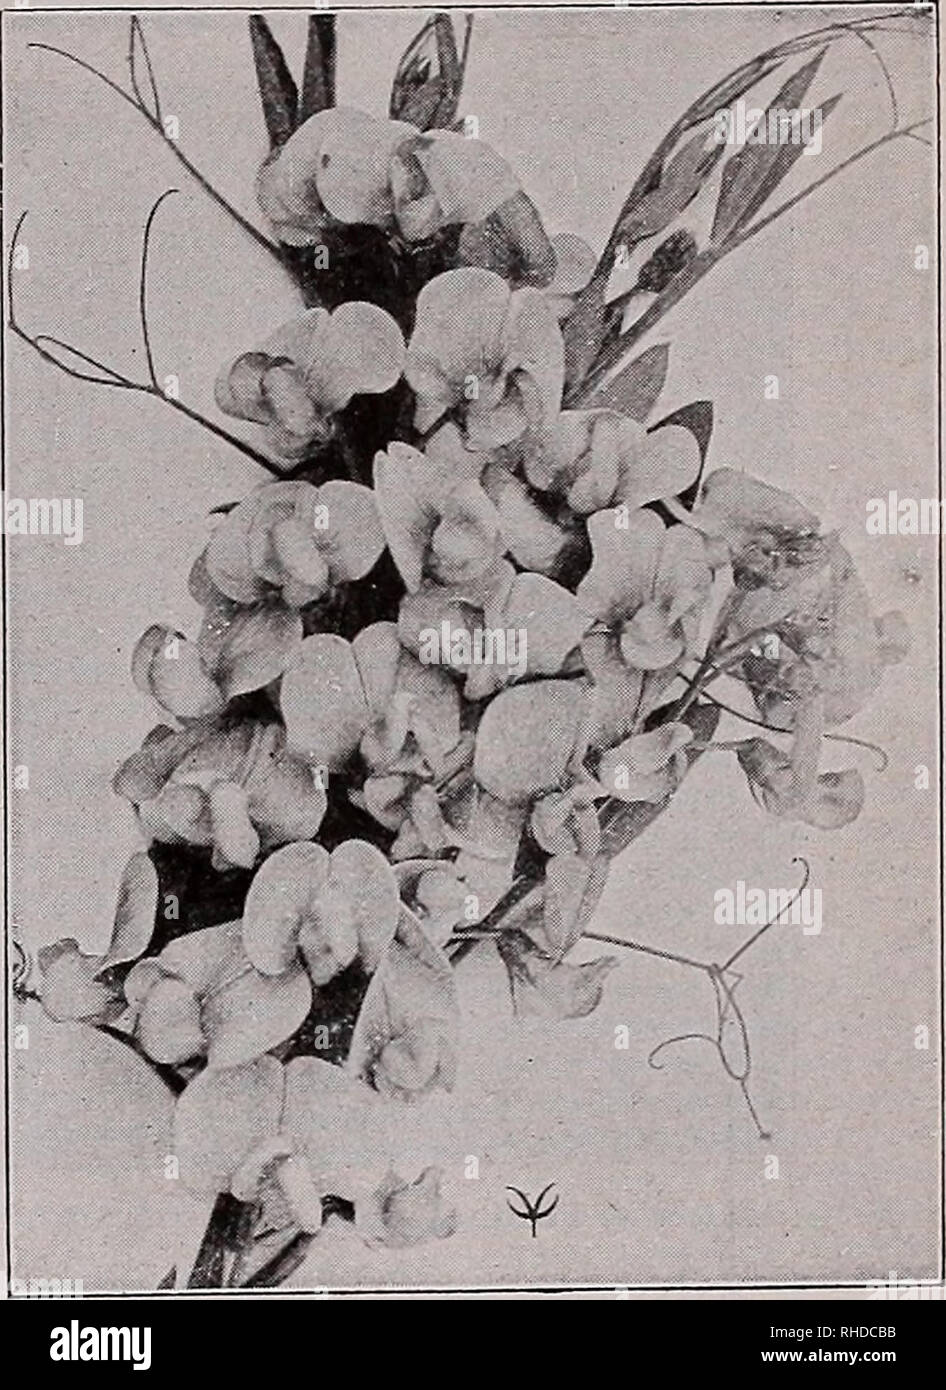 . Book for florists : spring 1934. Flowers Seeds Catalogs; Bulbs (Plants) Seedlings Catalogs; Vegetables Seeds Catalogs; Trees Seeds Catalogs; Horticulture Equipment and supplies Catalogs. HEUCHERA Sanguinea HOLLYHOCK Chater's Double LATHYRUS Latifolius (Perennial Pea) Geum Coccineum Atrosanguineum PI. X Semi-double,Trade pkt. Oz. orange-red, 2 ft M oz., 40c $0.25 $1.20 Coccineum Fl. PI. Mrs. Bradshaw. X Glowing red. 2 ft 34 oz., 45c .25 1.40 Borisii. X Neat tufts of evergreen foliage, large flowers brilliant scarlet in bloom from June till late autumn, 16 in 34 oz., $1.20 .50 4.00 Lady Strath Stock Photo